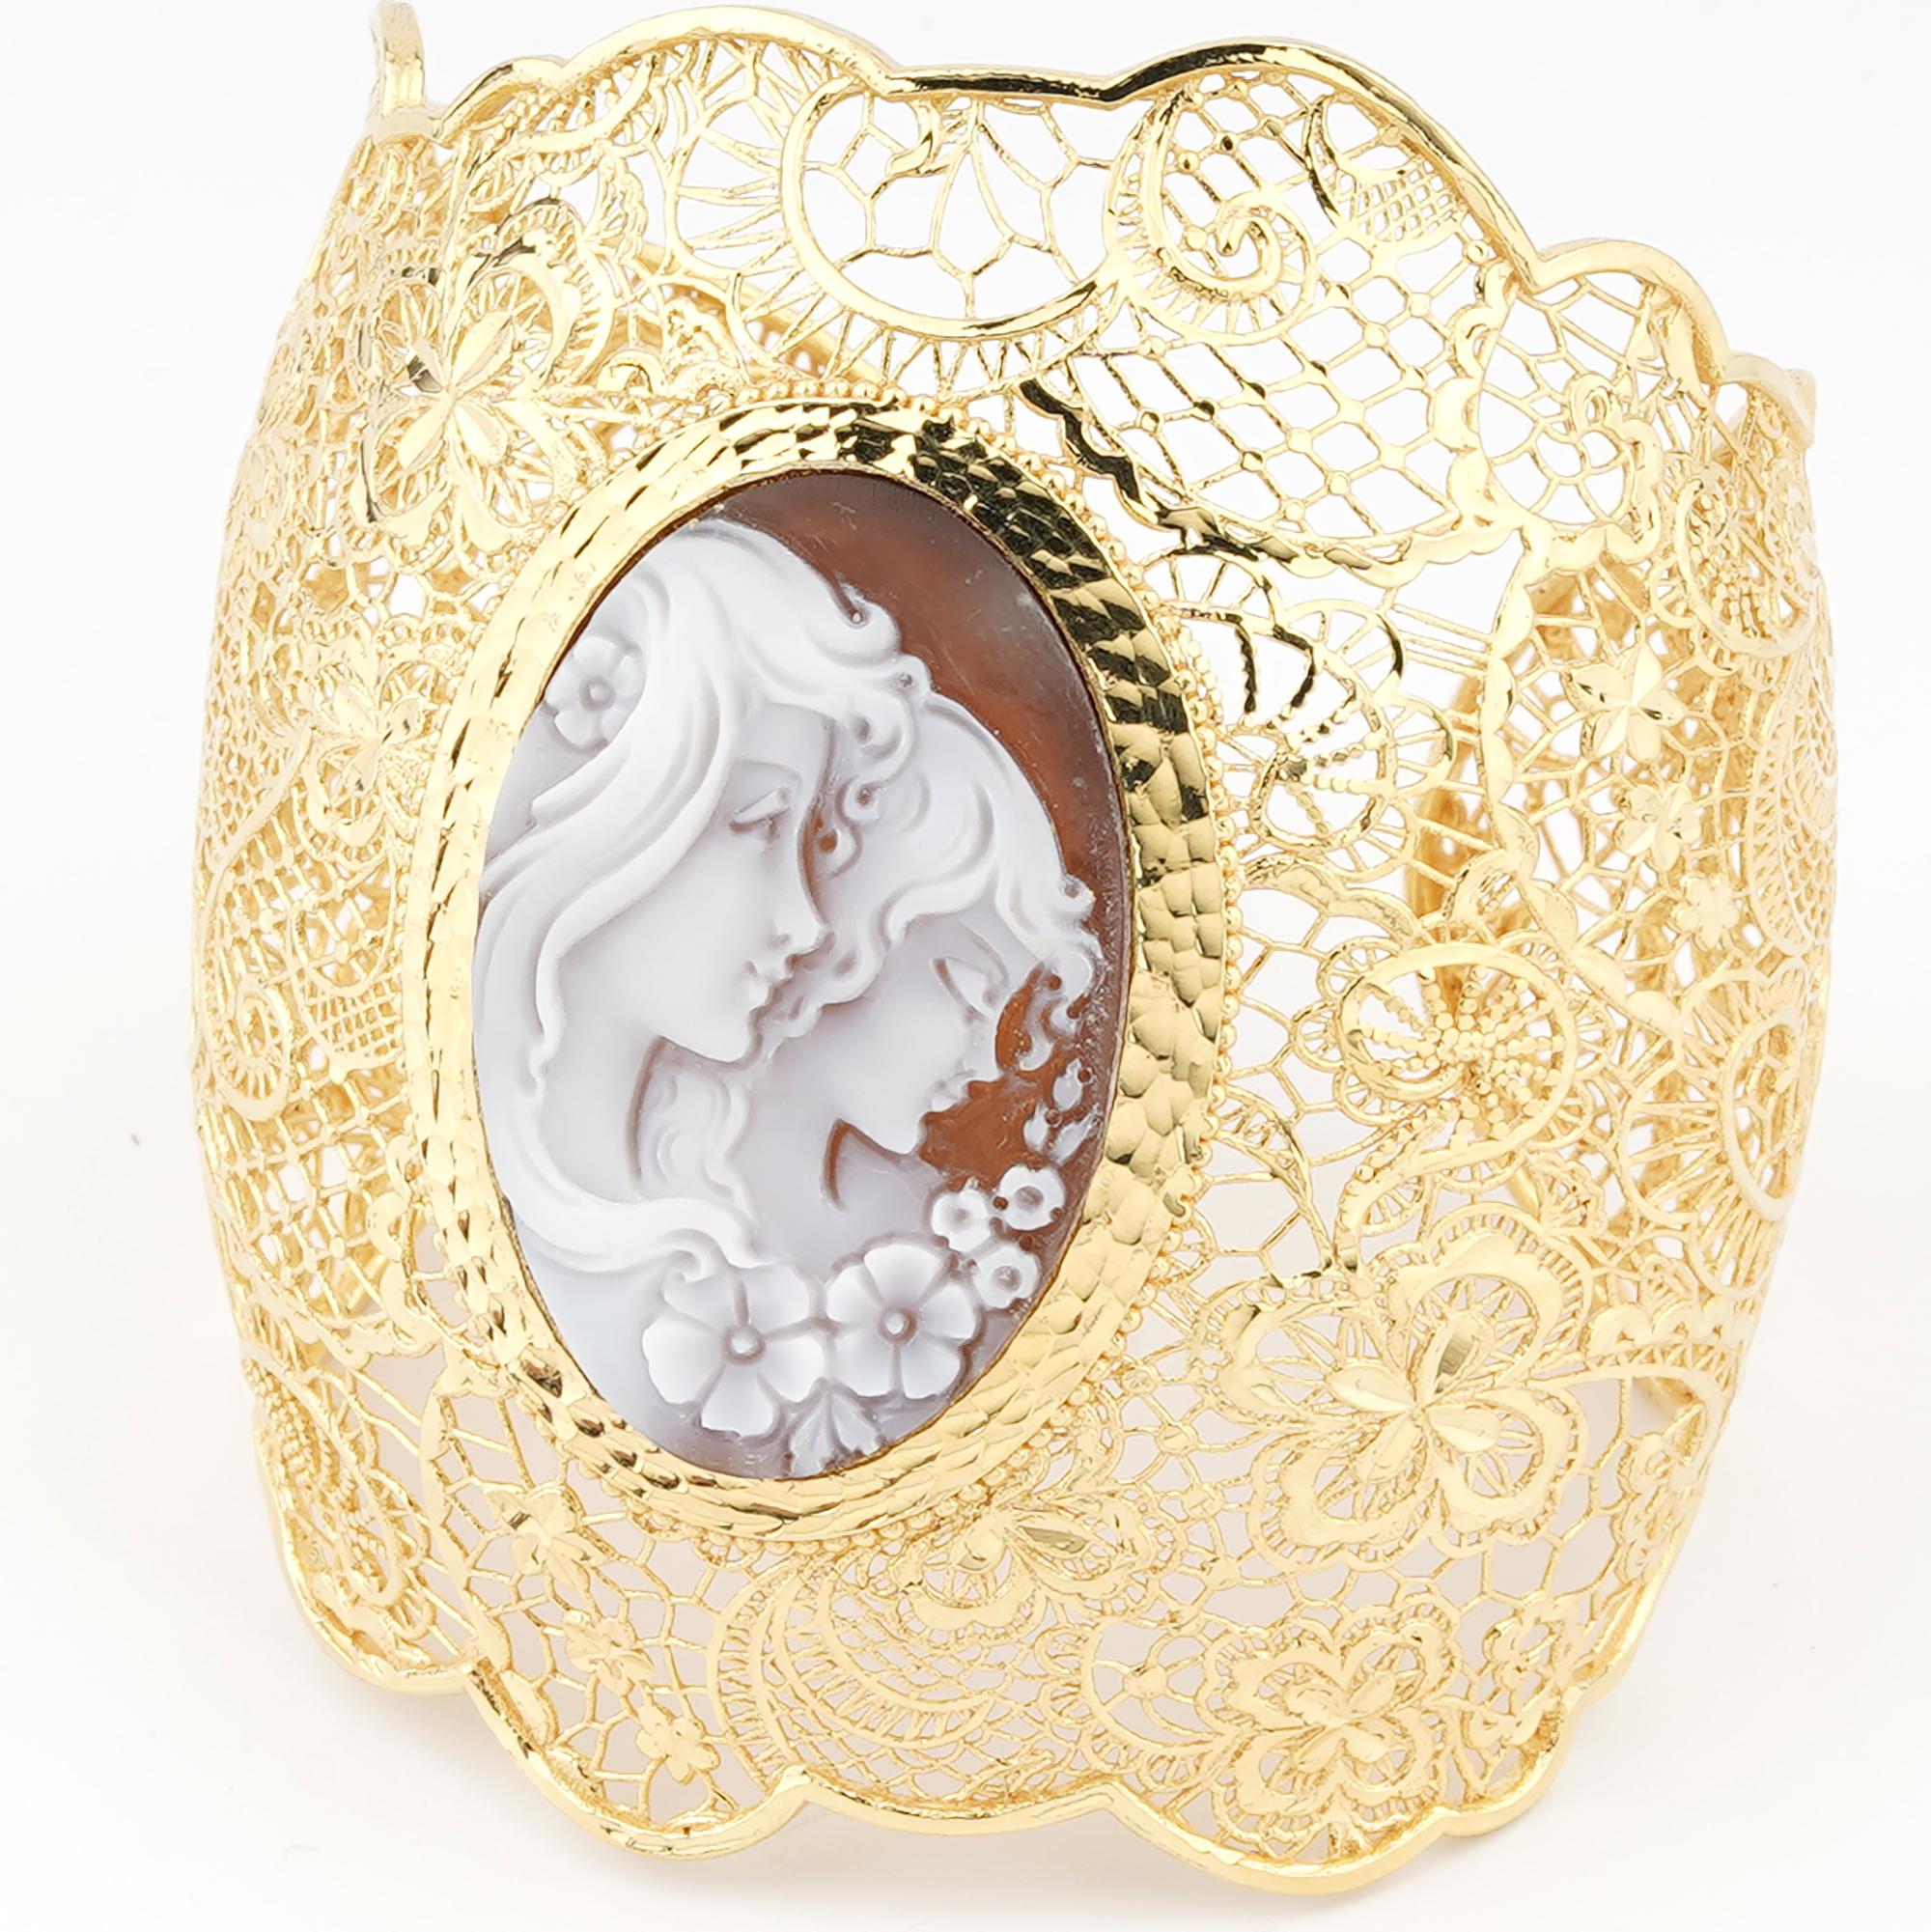 18 carat Gold Plated 925 Sterling Silver with 40mm Sea Shell Cameo Bracelet 16cm. Fully handcarved Portrait on a sea shell cameo set in a 18kt Gold plated silver cuff bracelet. Carvings are performed by our master artisans with generations of